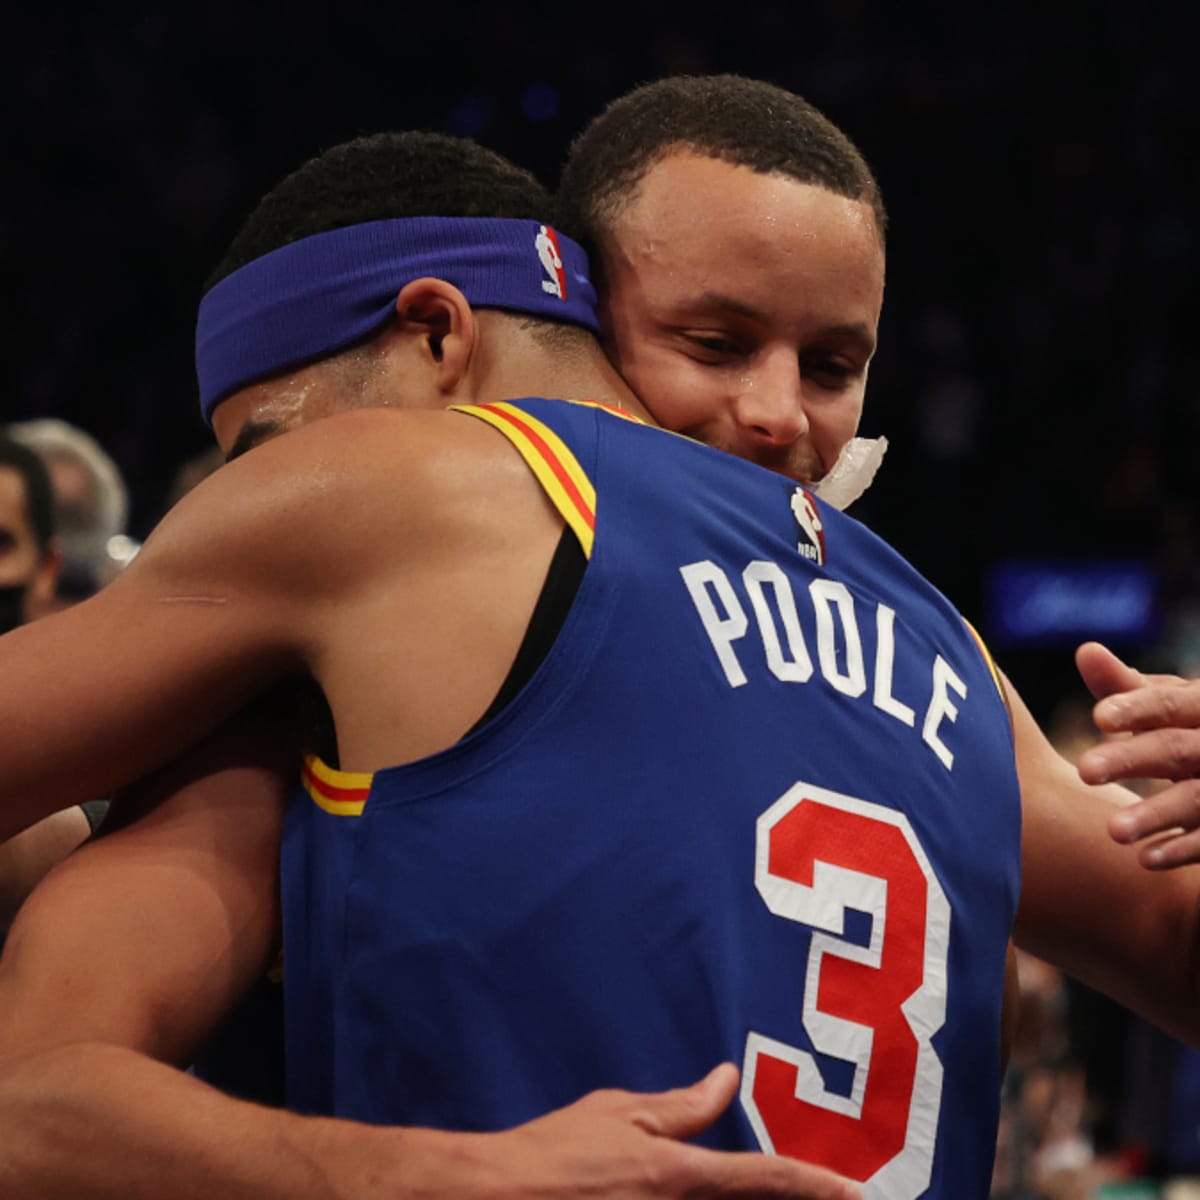 Warriors' Steph Curry reflects on Jordan Poole's departure: 'You hate  losing JP